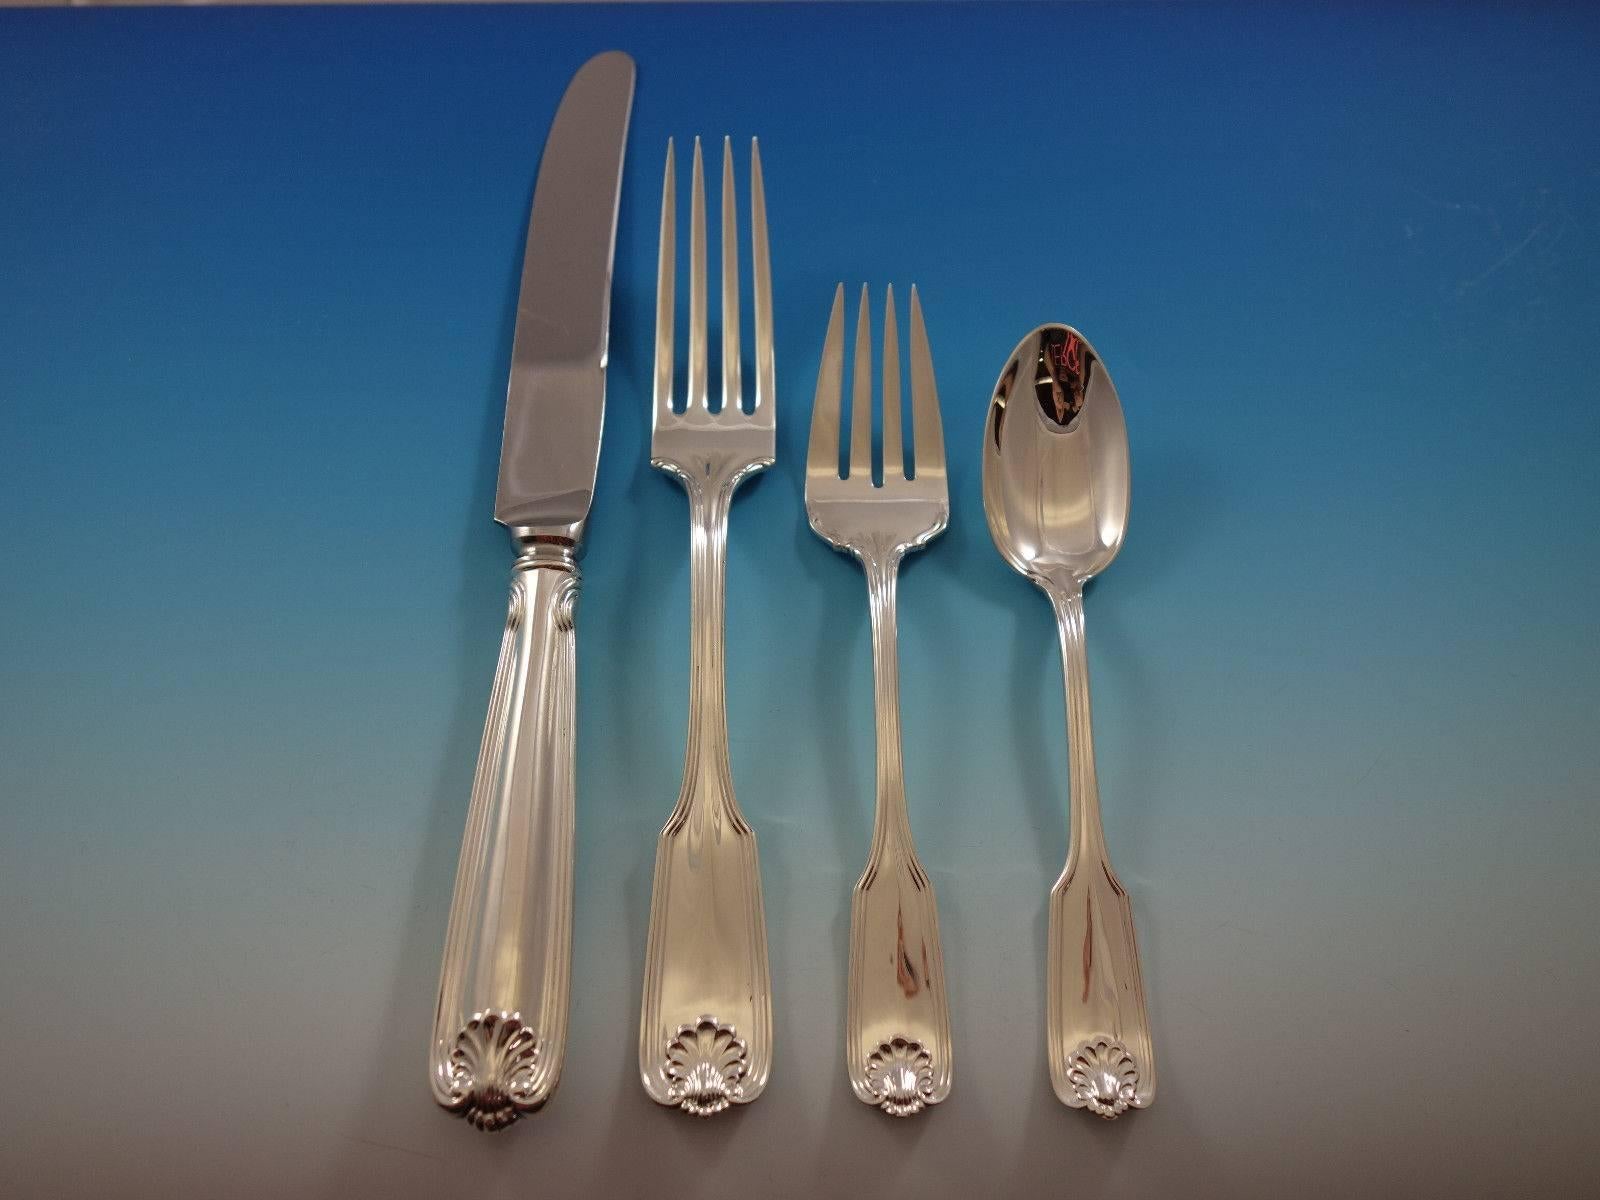 Dinner size Benjamin Franklin by Towle sterling silver flatware set - 63 pieces. this set includes: 

12 dinner knives, 9 5/8